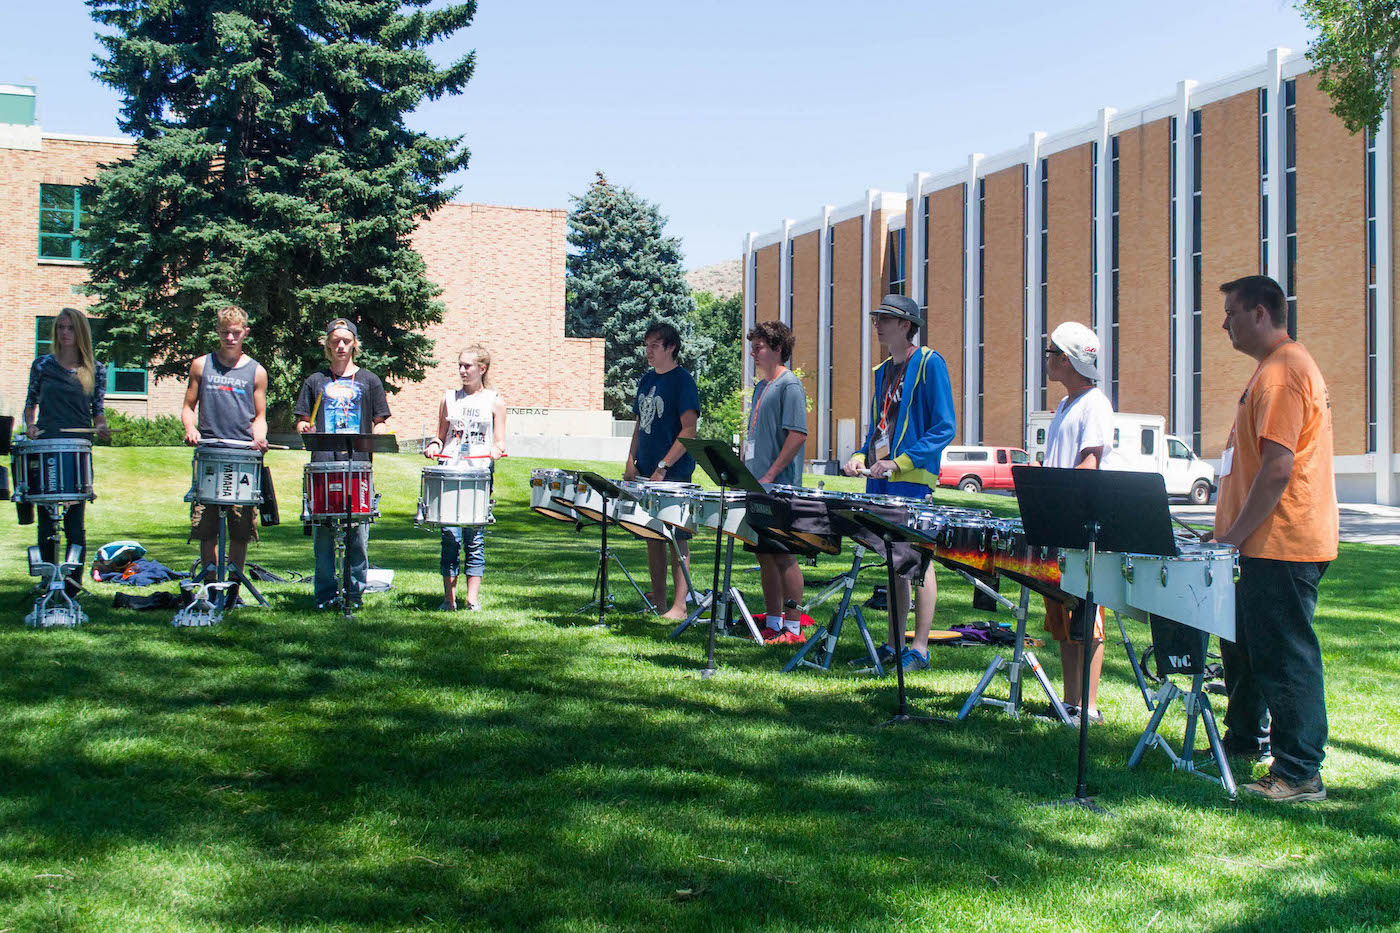 Marching Band Camp participants playing music on the Quad.